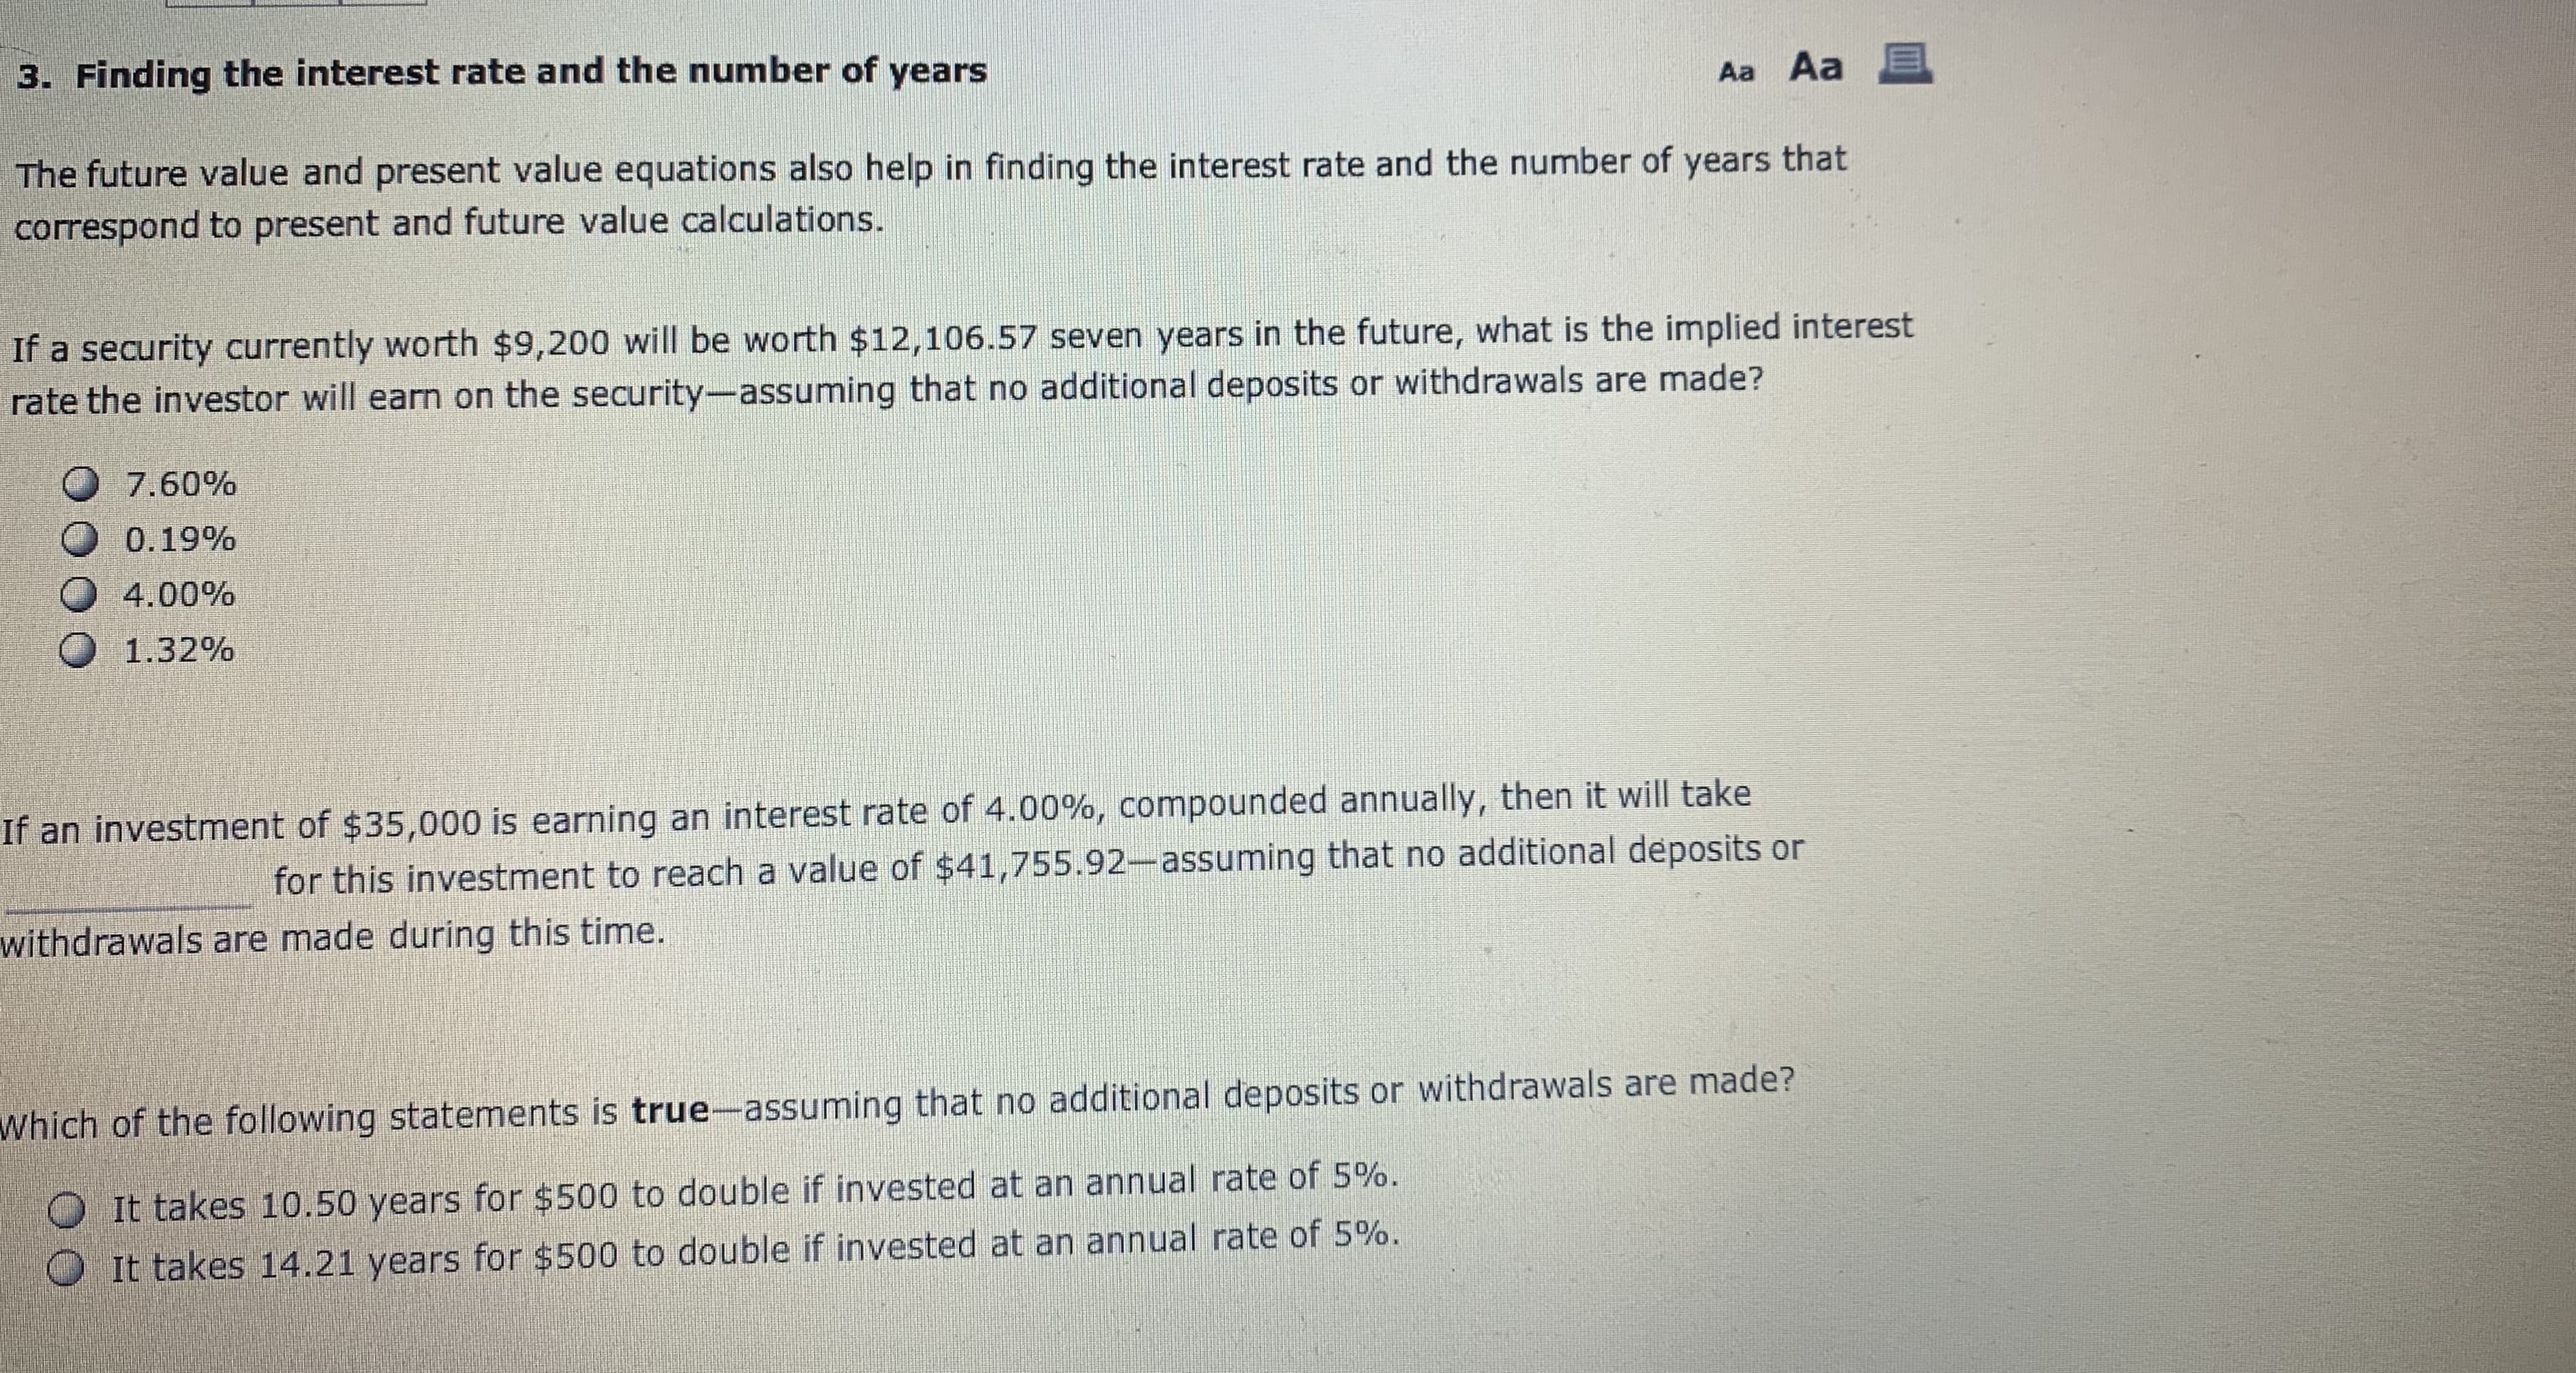 3. Finding the interest rate and the number of years
Aa Aa E
The future value and present value equations also help in finding the interest rate and the number of years that
correspond to present and future value calculations
If a security currently worth $9,200 will be worth $12,106.57 seven years in the future, what is the implied interest
rate the investor will earn on the security-assuming that no additional deposits or withdrawals are made?
7.60%
0 0.19%
О 4.00%
О 1.32%
If an investment of $35,000 is earning an interest rate of 4.00%, compounded annually, then it will take
for this investment to reach a value of $41,755.92-assuming that no additional deposits or
withdrawals are made during this time.
Which of the following statements is true-assuming that no additional deposits or withdrawals are made?
It takes 10.50 years for $500 to double if invested at an annual rate of 5%.
0 It takes 14.21 years for $500 to double if invested at an annual rate of 5%.
